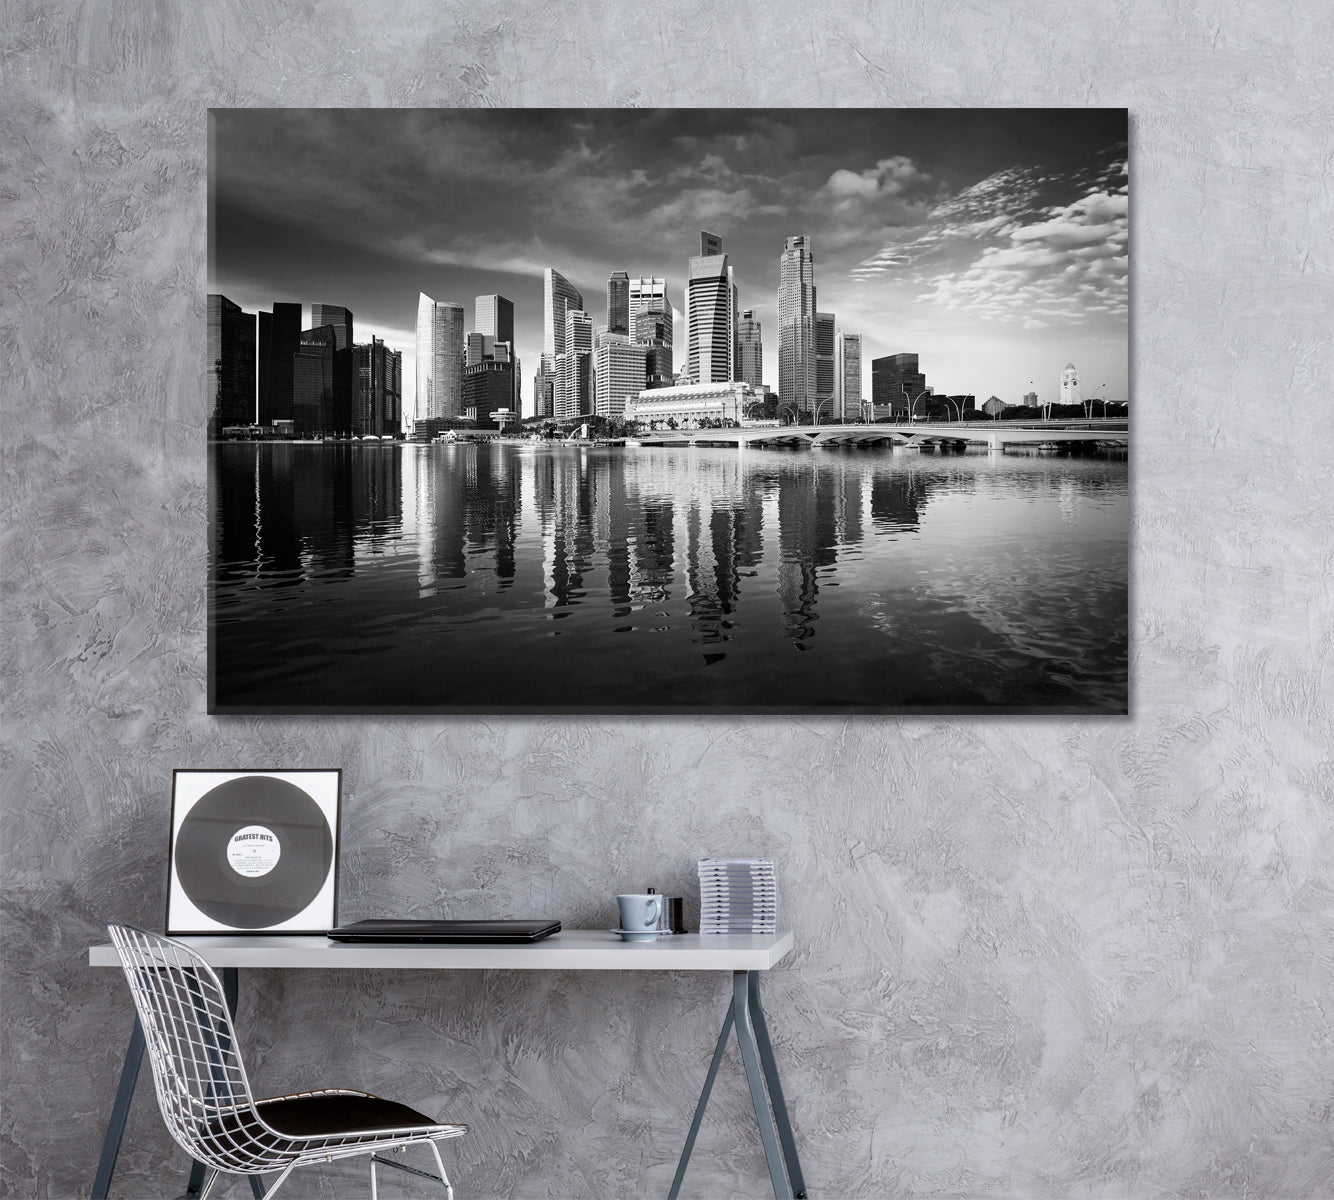 Singapore in Black and White Canvas Print ArtLexy 1 Panel 24"x16" inches 